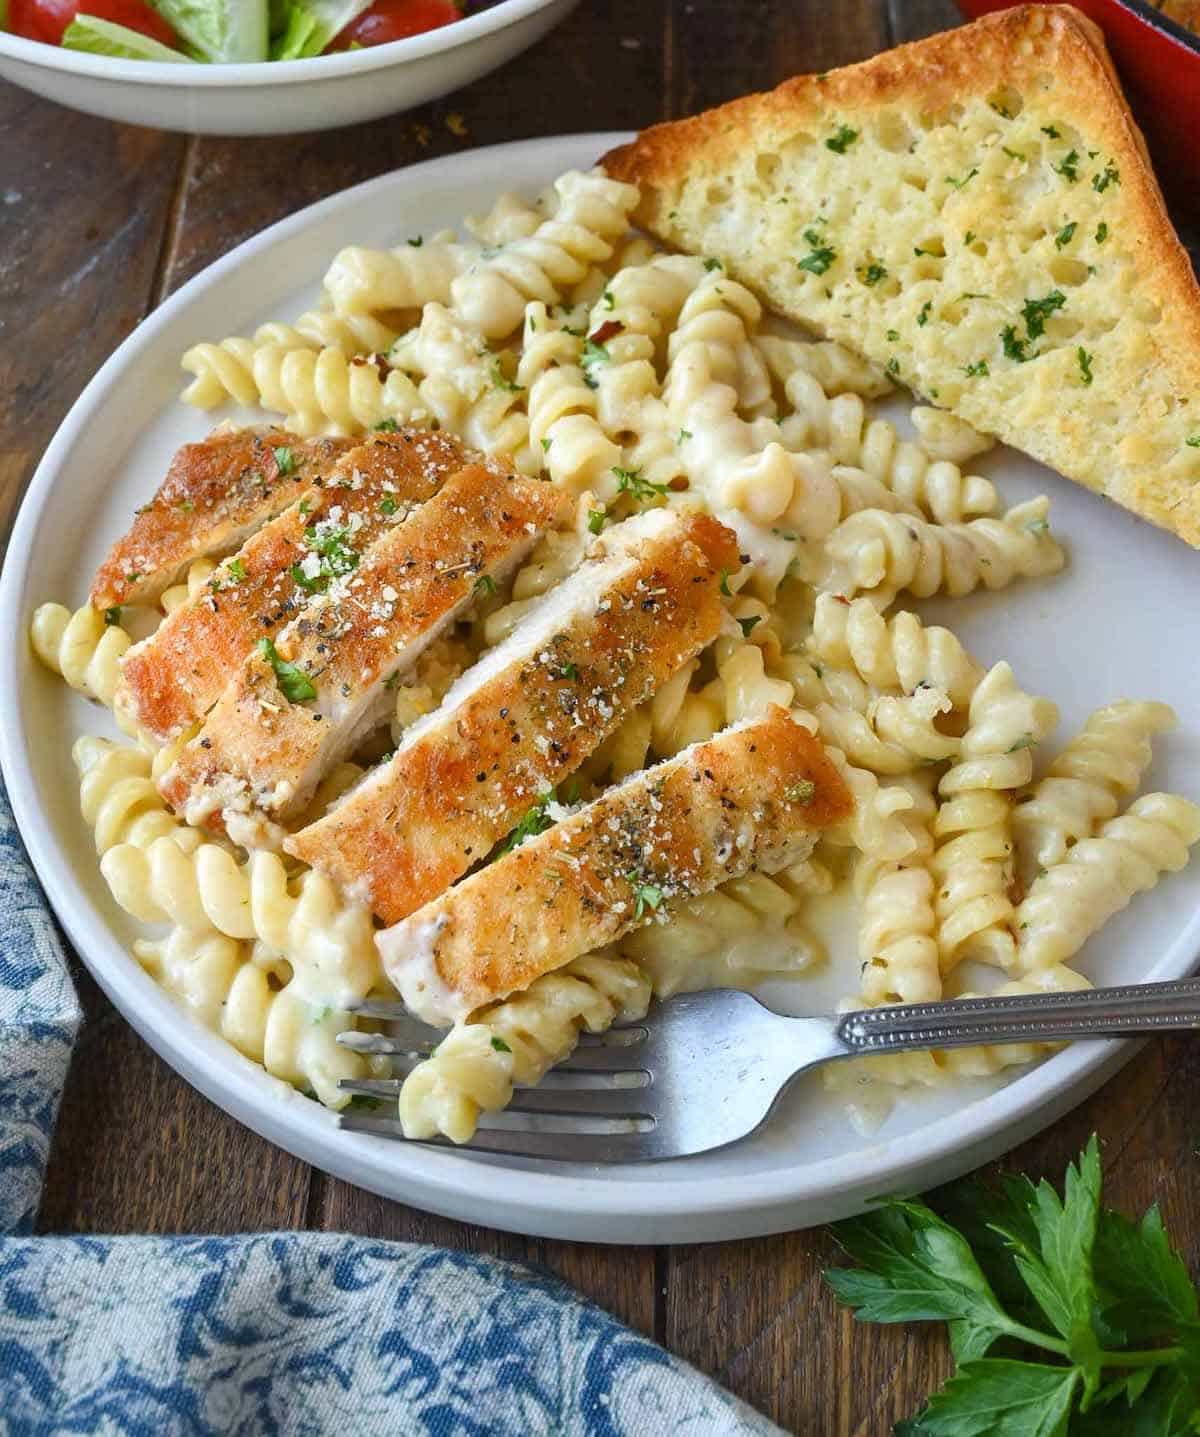 Chicken and pasta on a plate with garlic bread.